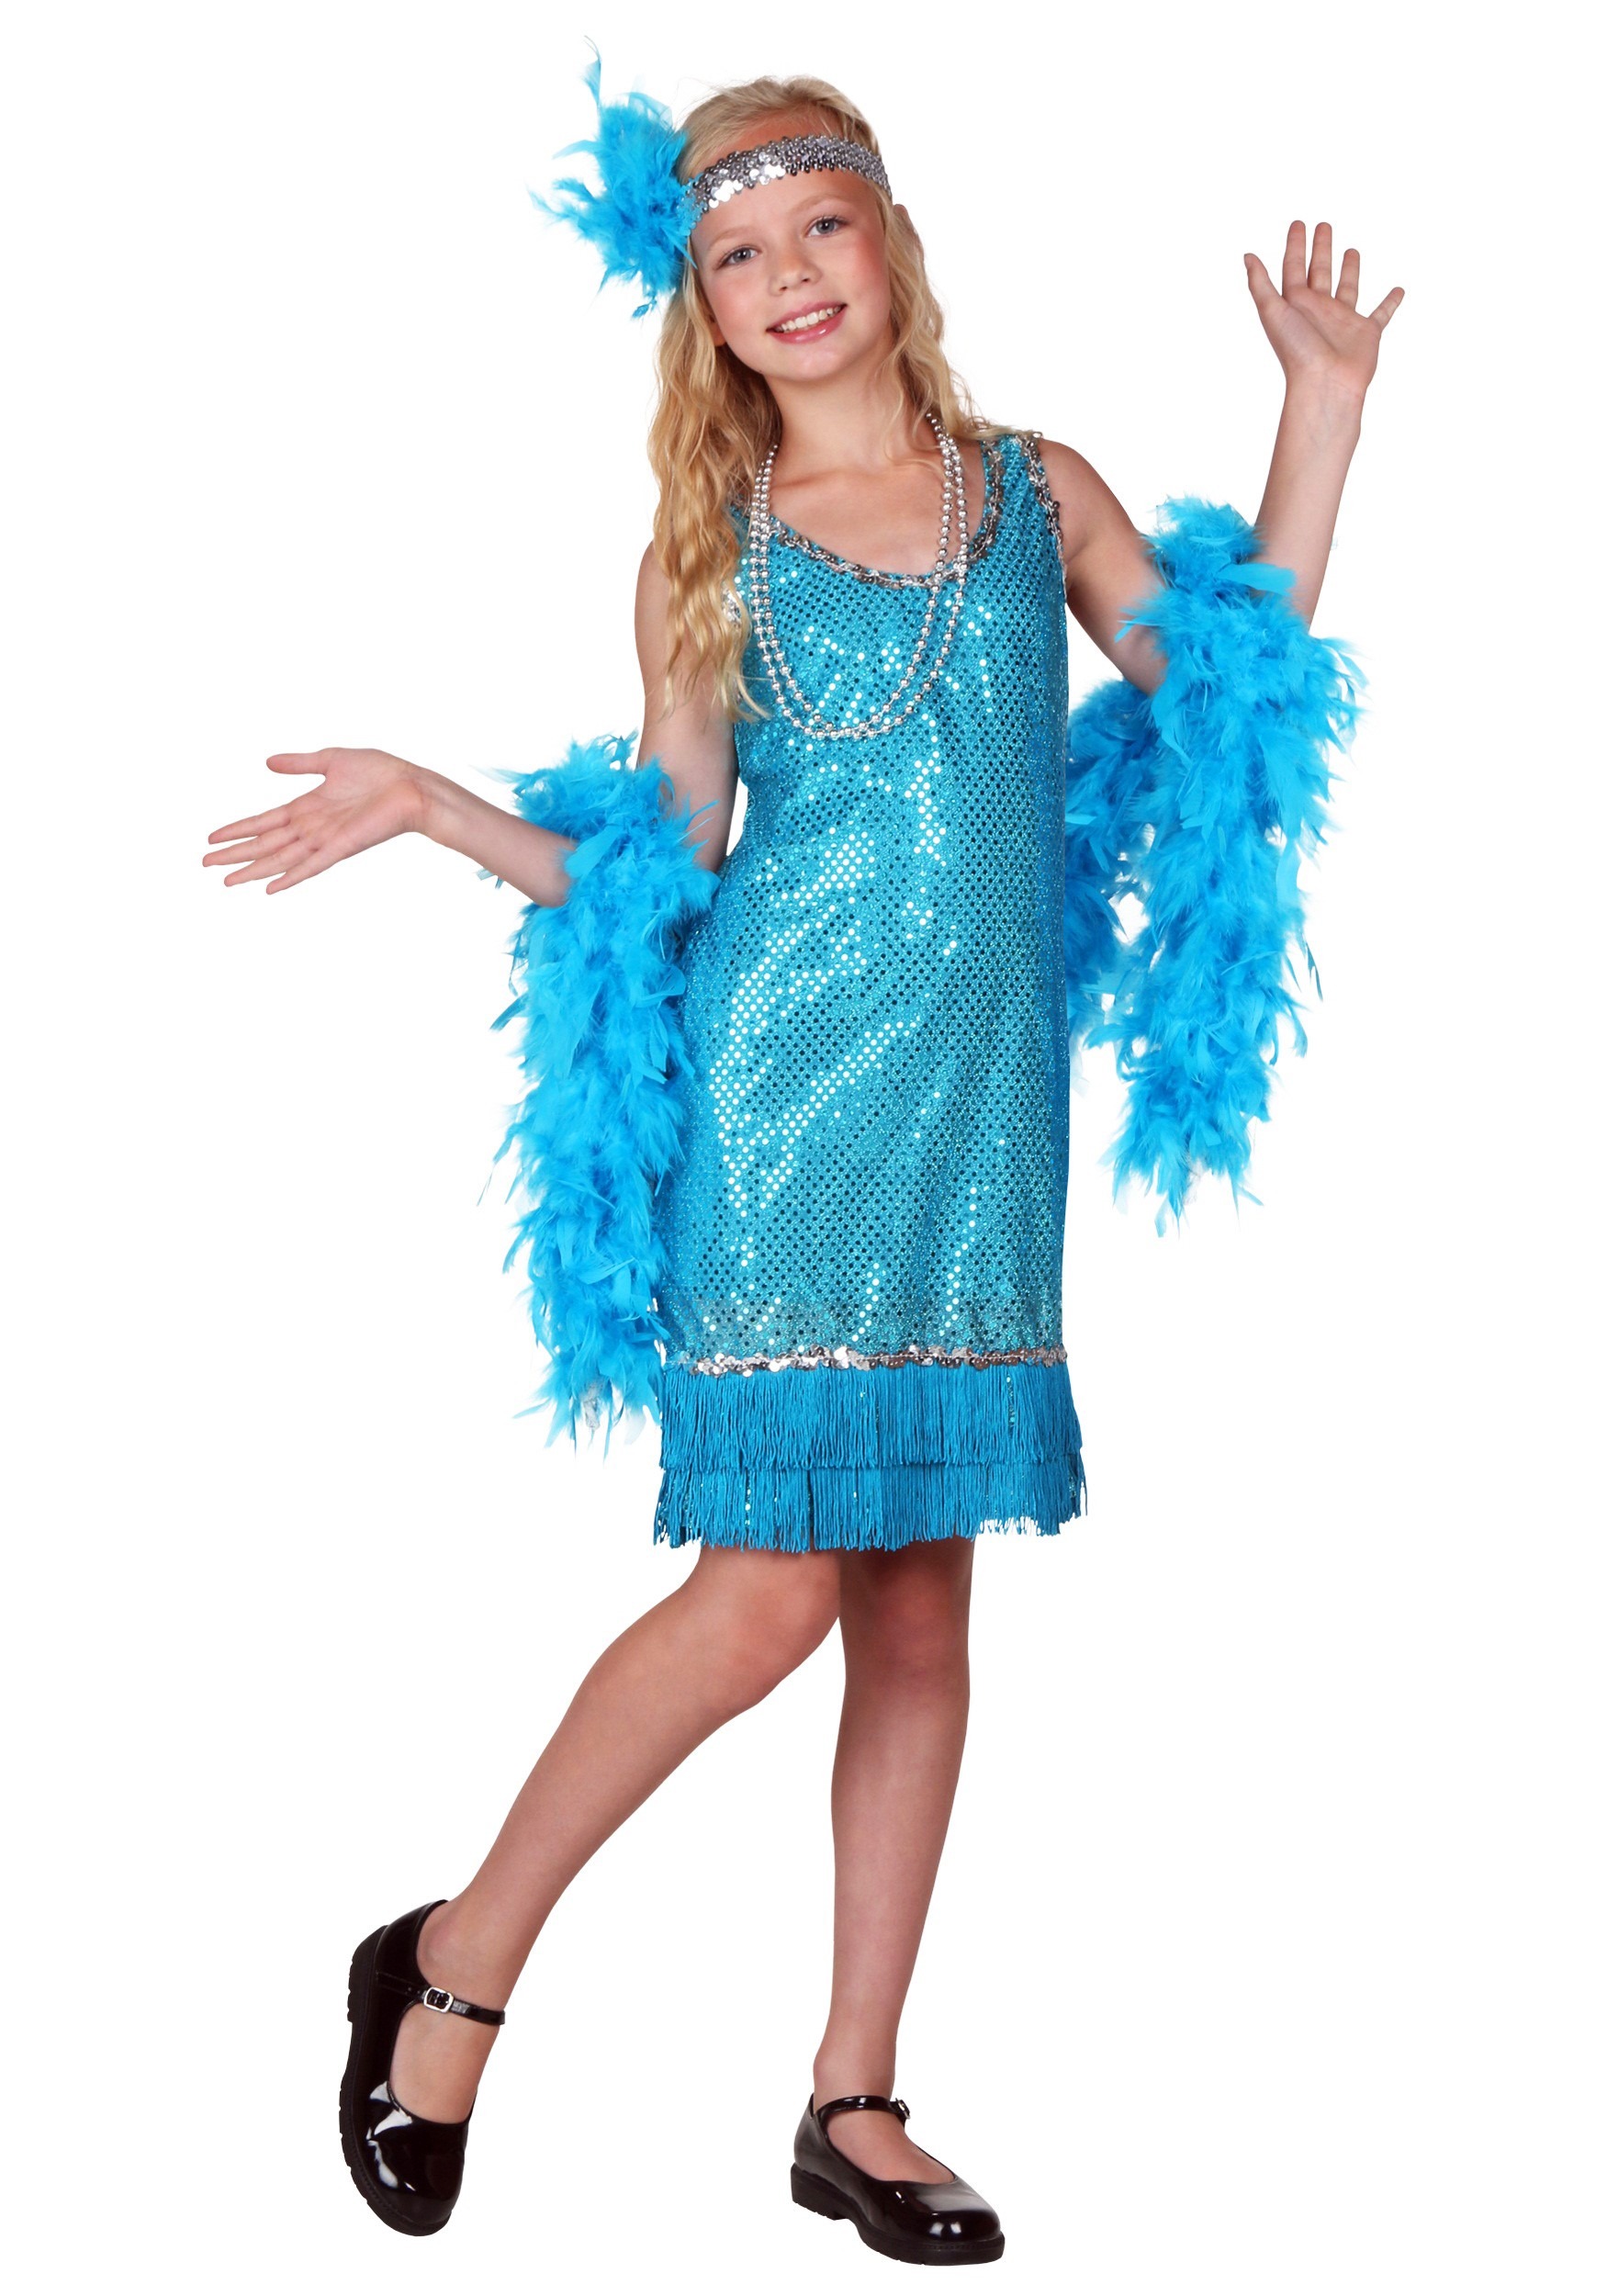 Photos - Fancy Dress A&D FUN Costumes Kid's Turquoise Sequin and Fringe Flapper Costume Blue 